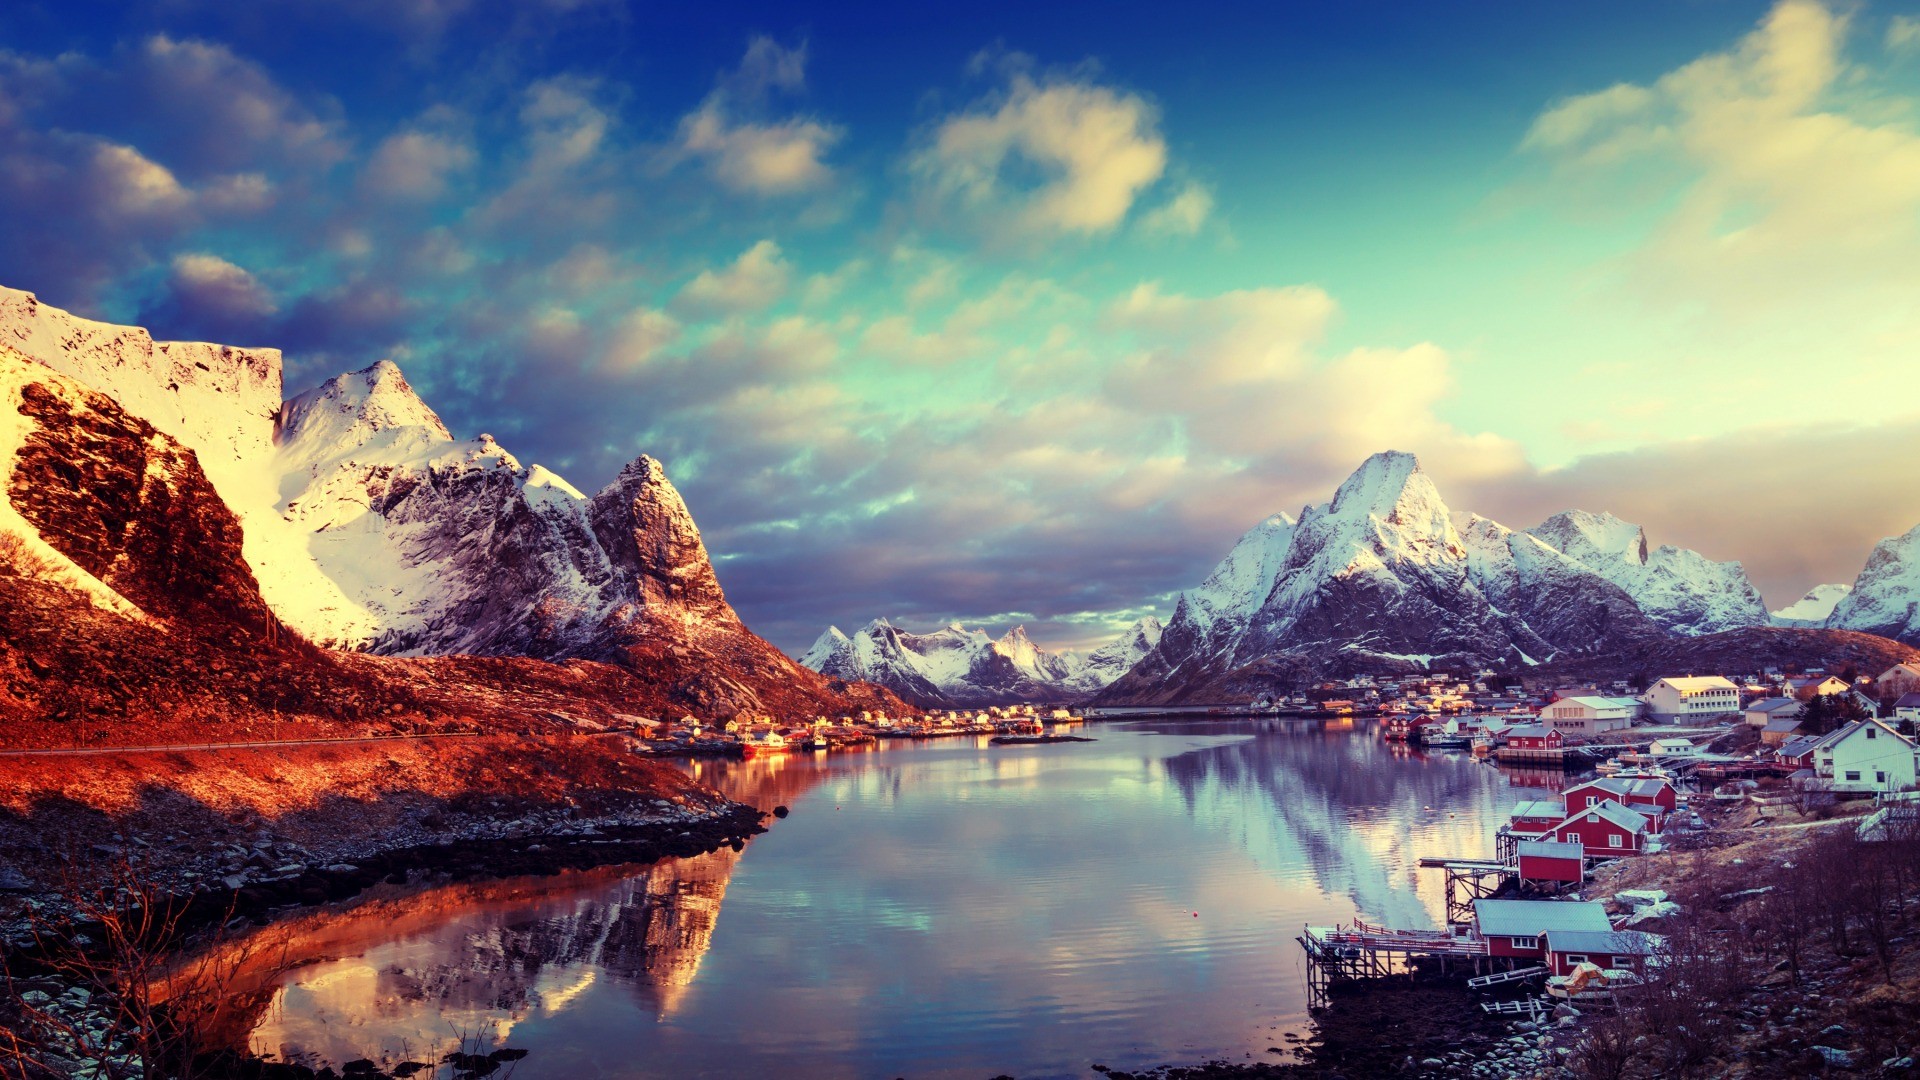 General 1920x1080 nature landscape clouds mountains lake Lofoten Norway snowy peak house village water reflection winter trees long exposure river snow sun rays fall stones